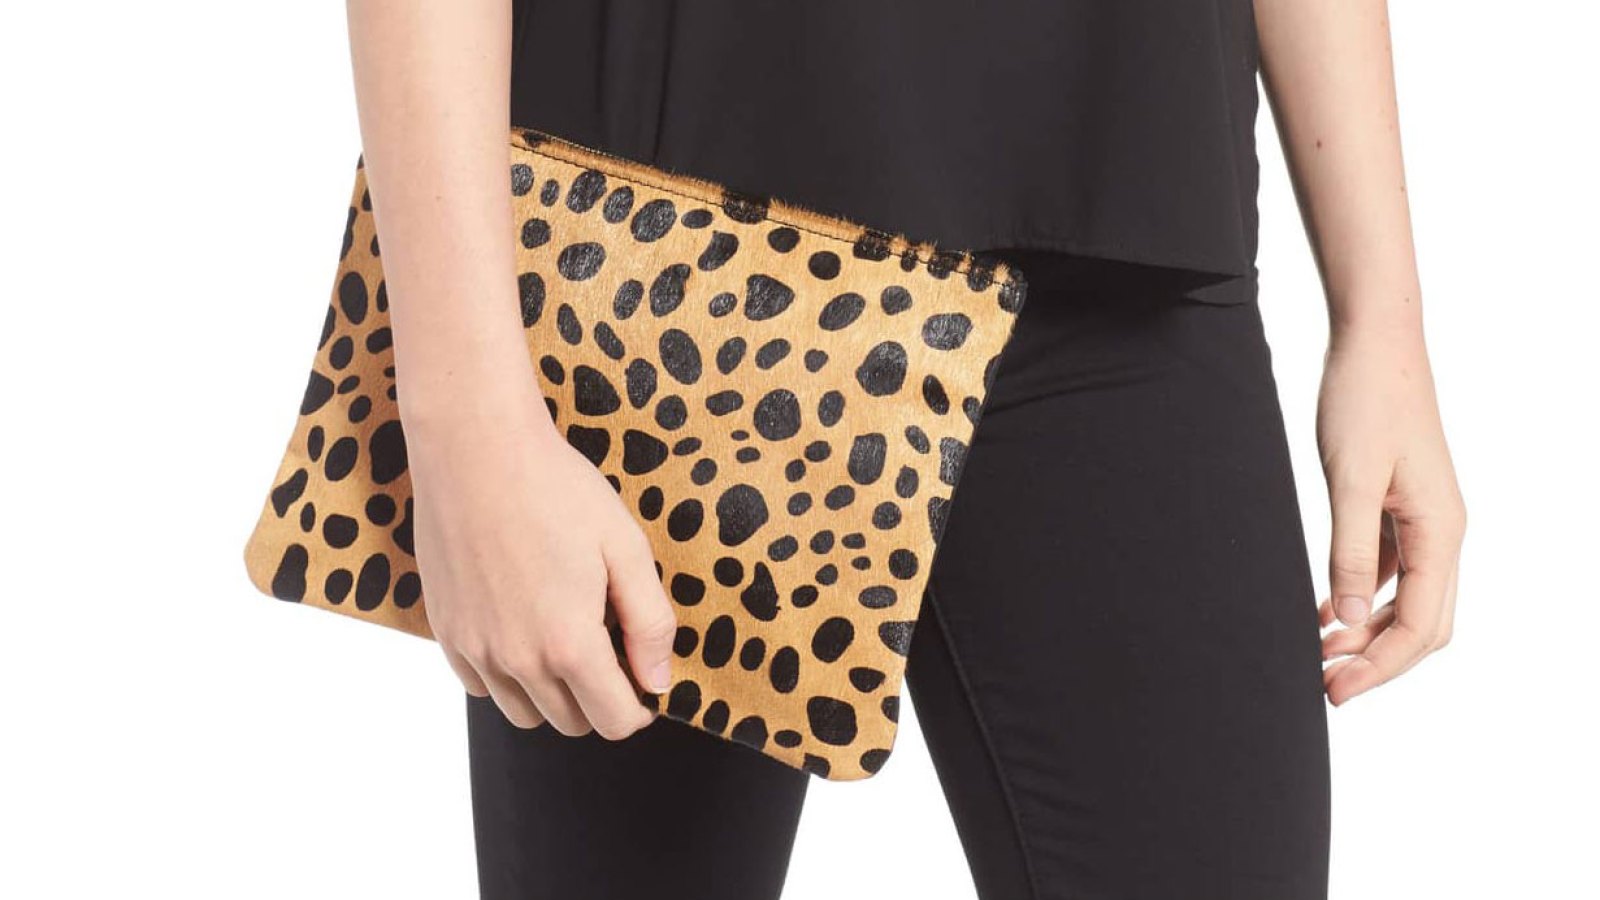 Shop This Leopard Print Pouch Back in Stock at Nordstrom